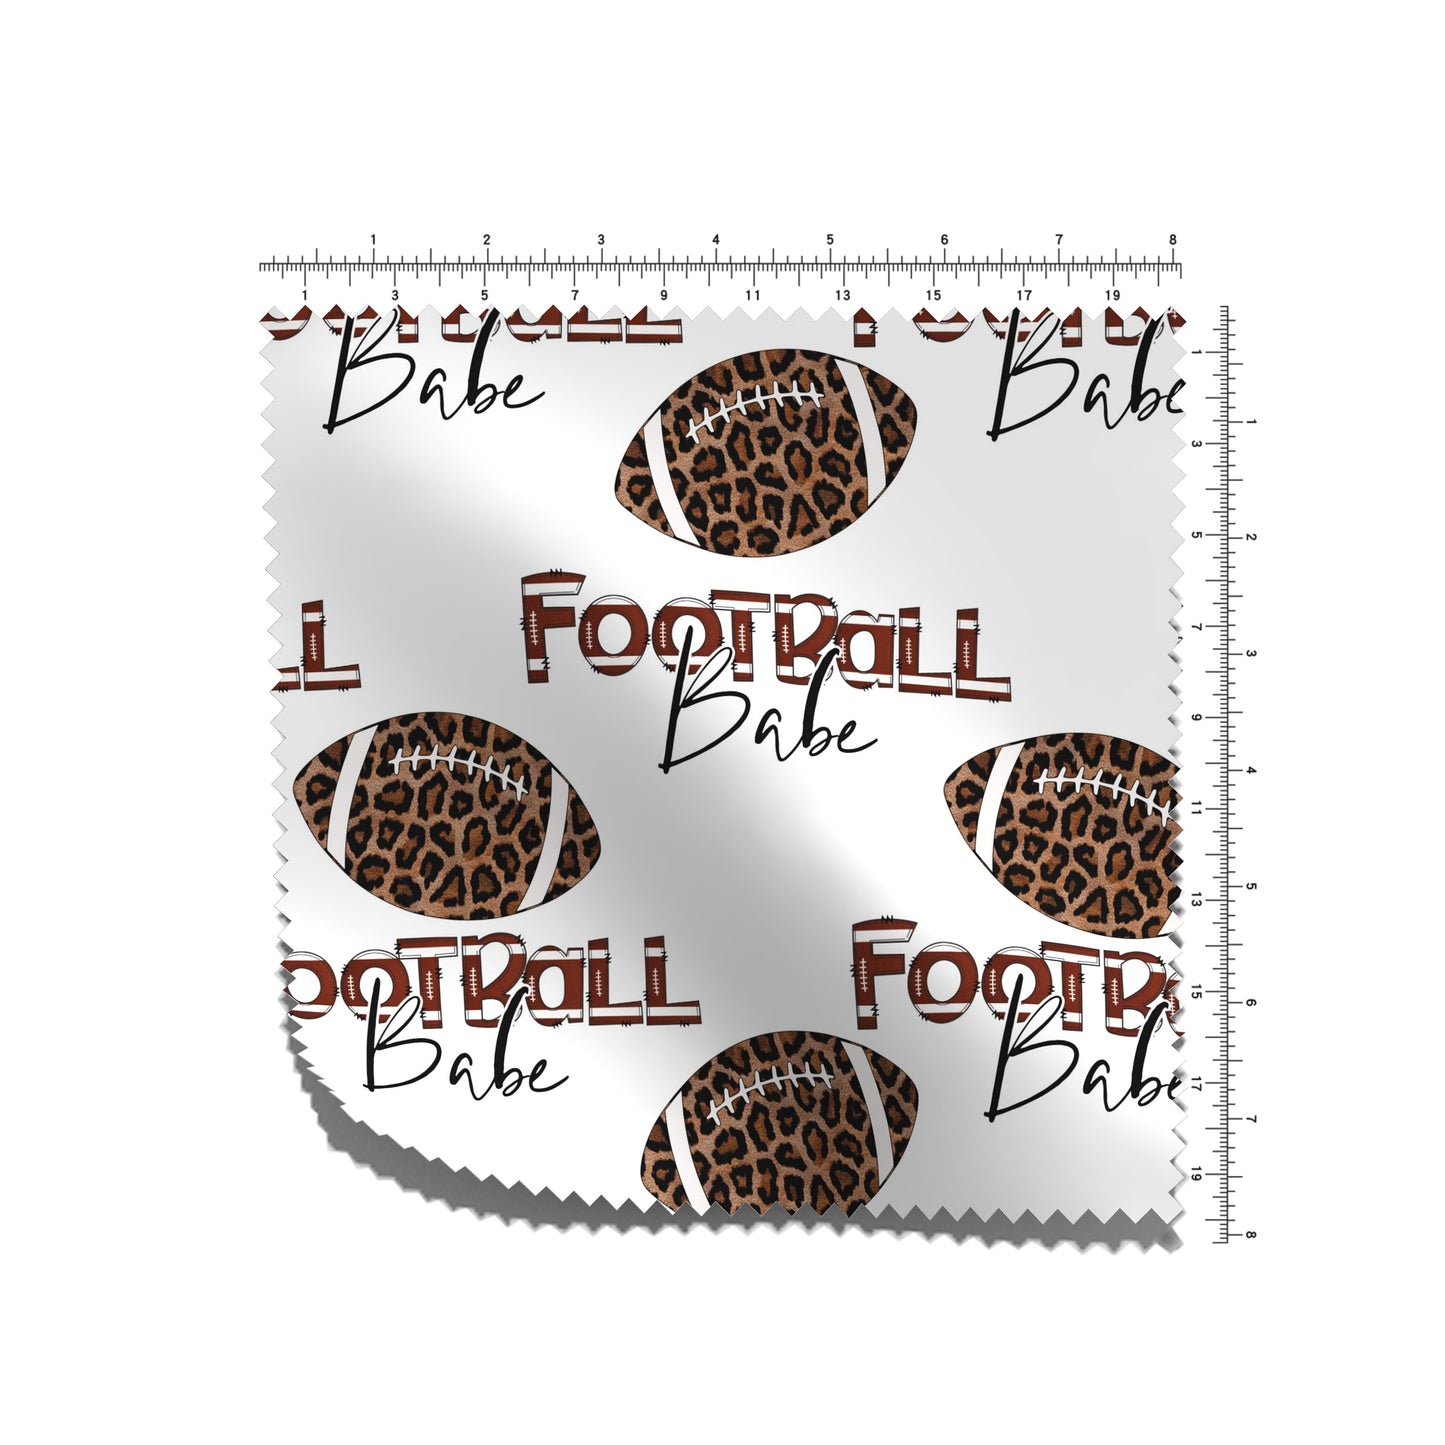 Football Babe DBP Fabric Double Brushed Polyester DBP2647